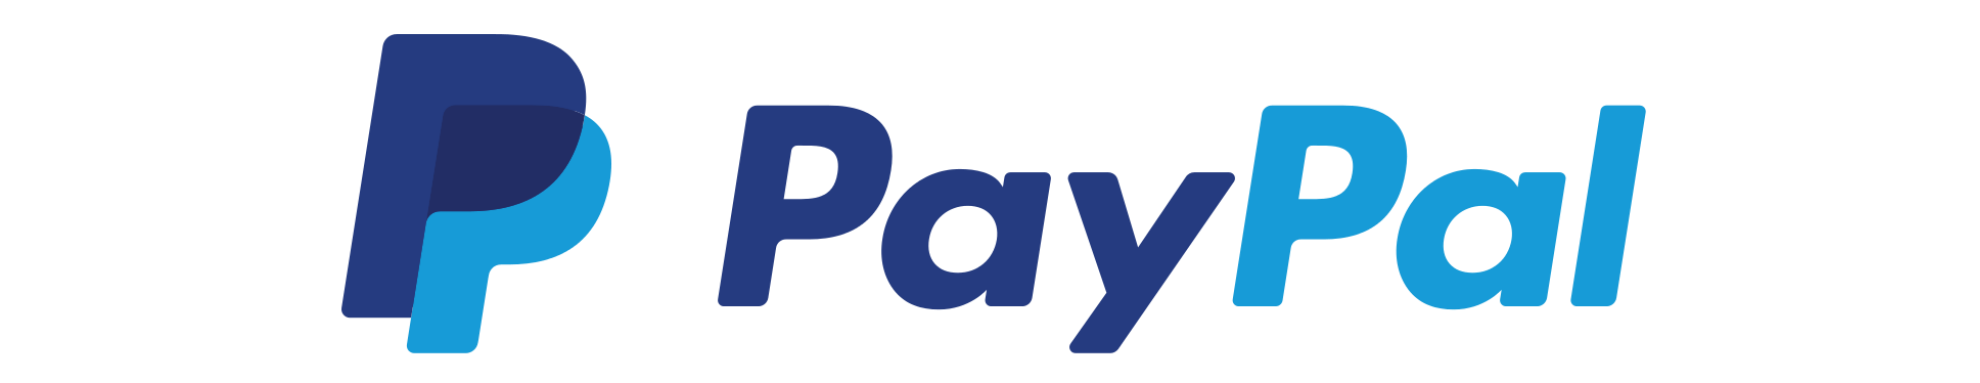 Paypal HD PNG - 145597